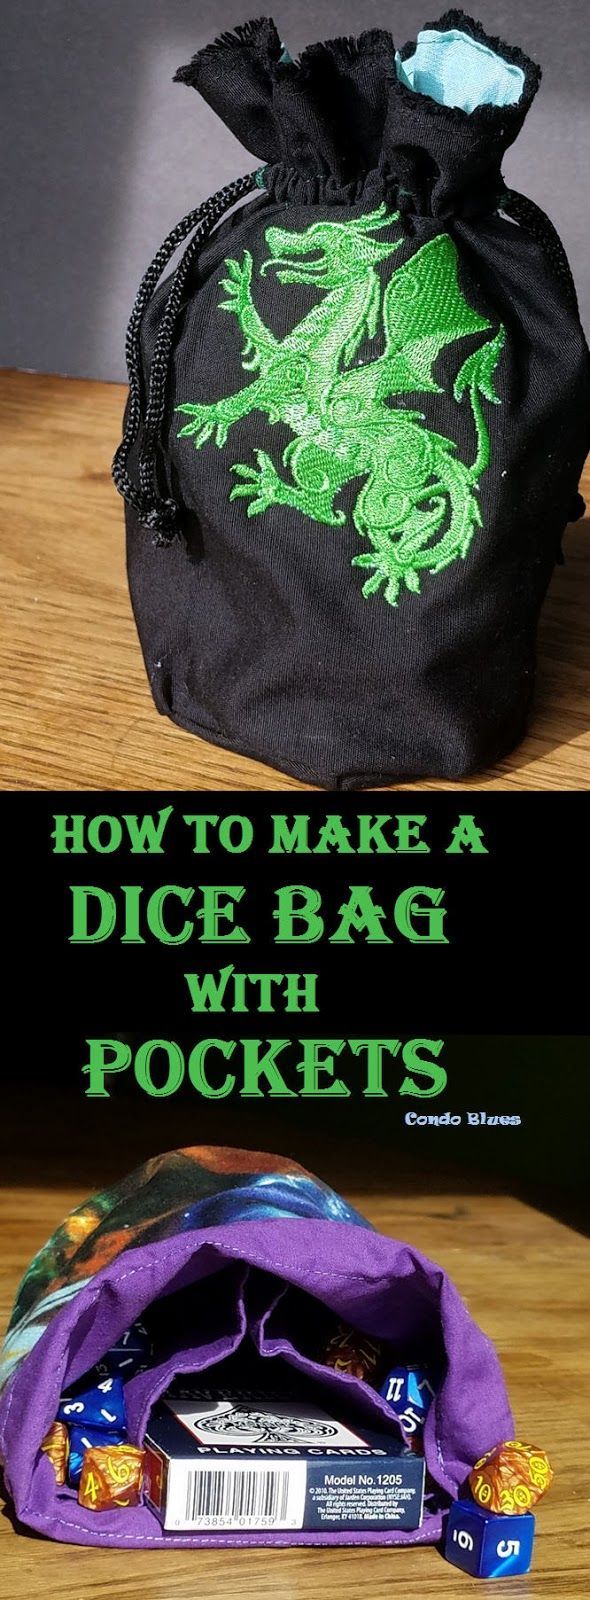 How to Make a Drawstring Dice Bag with Pockets - How to Make a Drawstring Dice Bag with Pockets -   17 diy Bag with pockets ideas